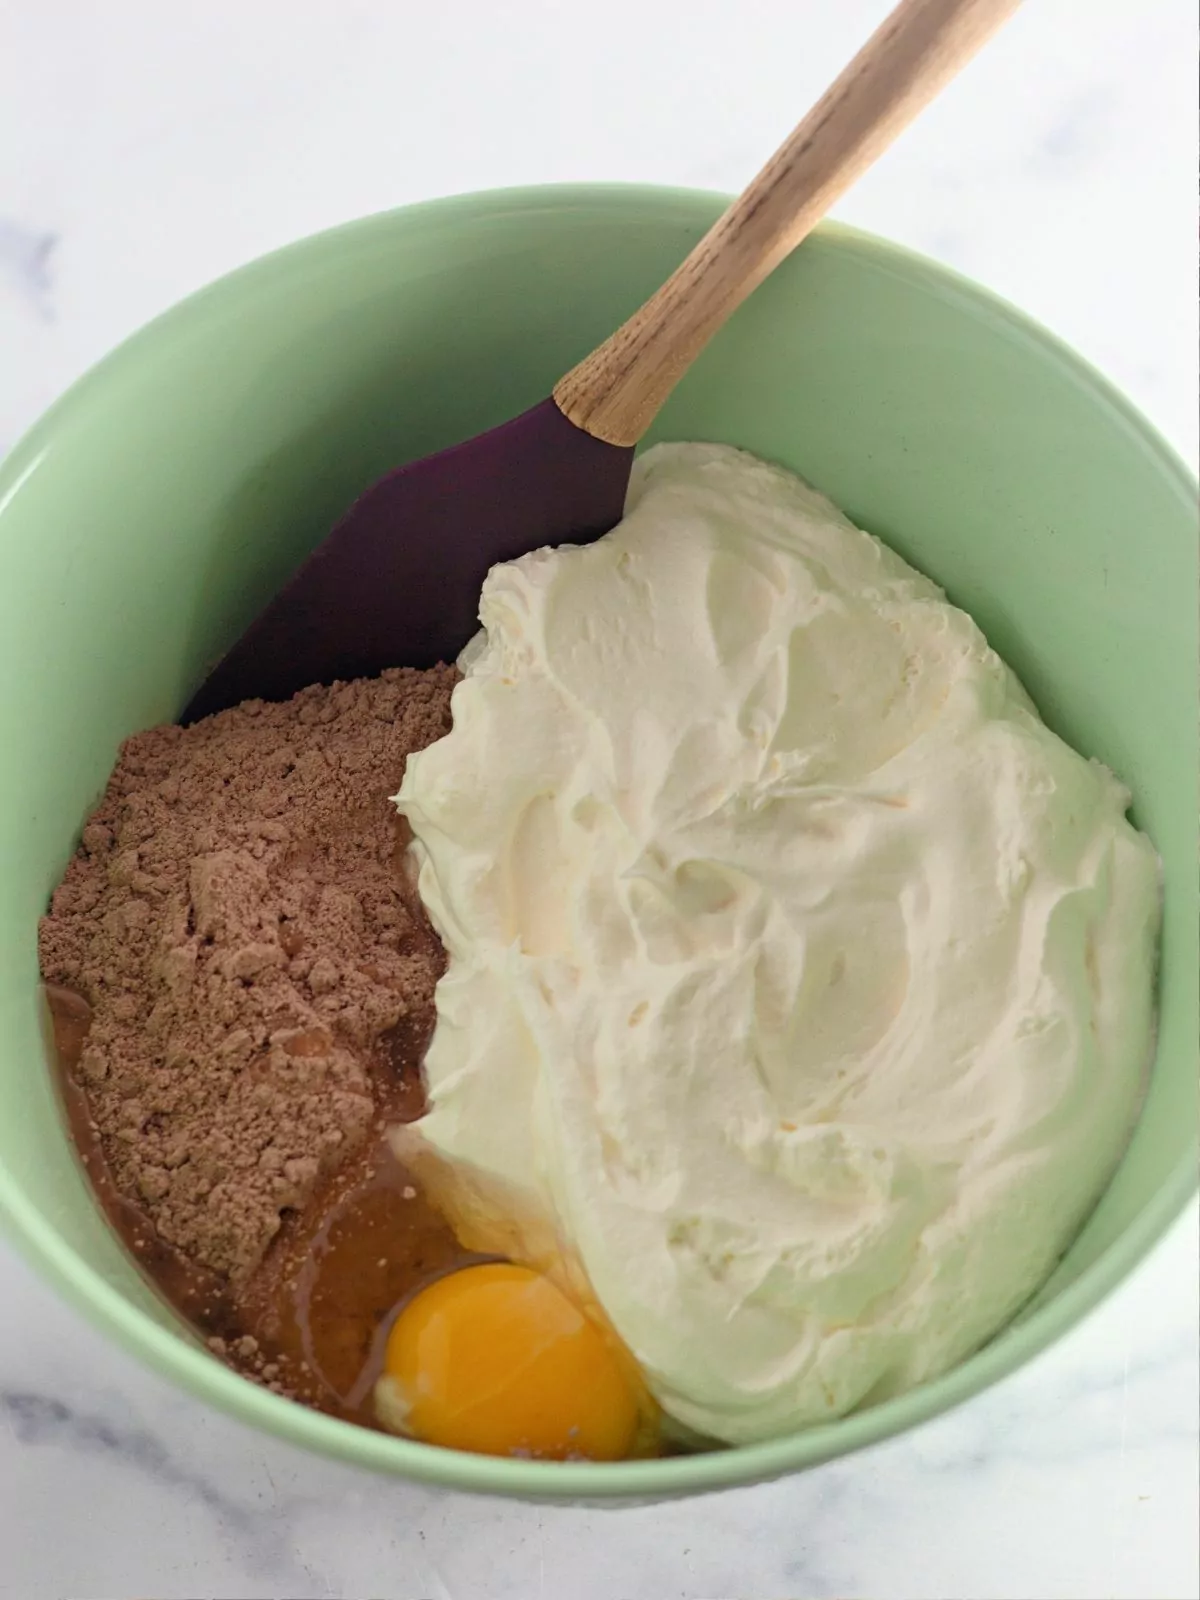 Cake Mix cookie ingredients in green bowl with wooden spoon.